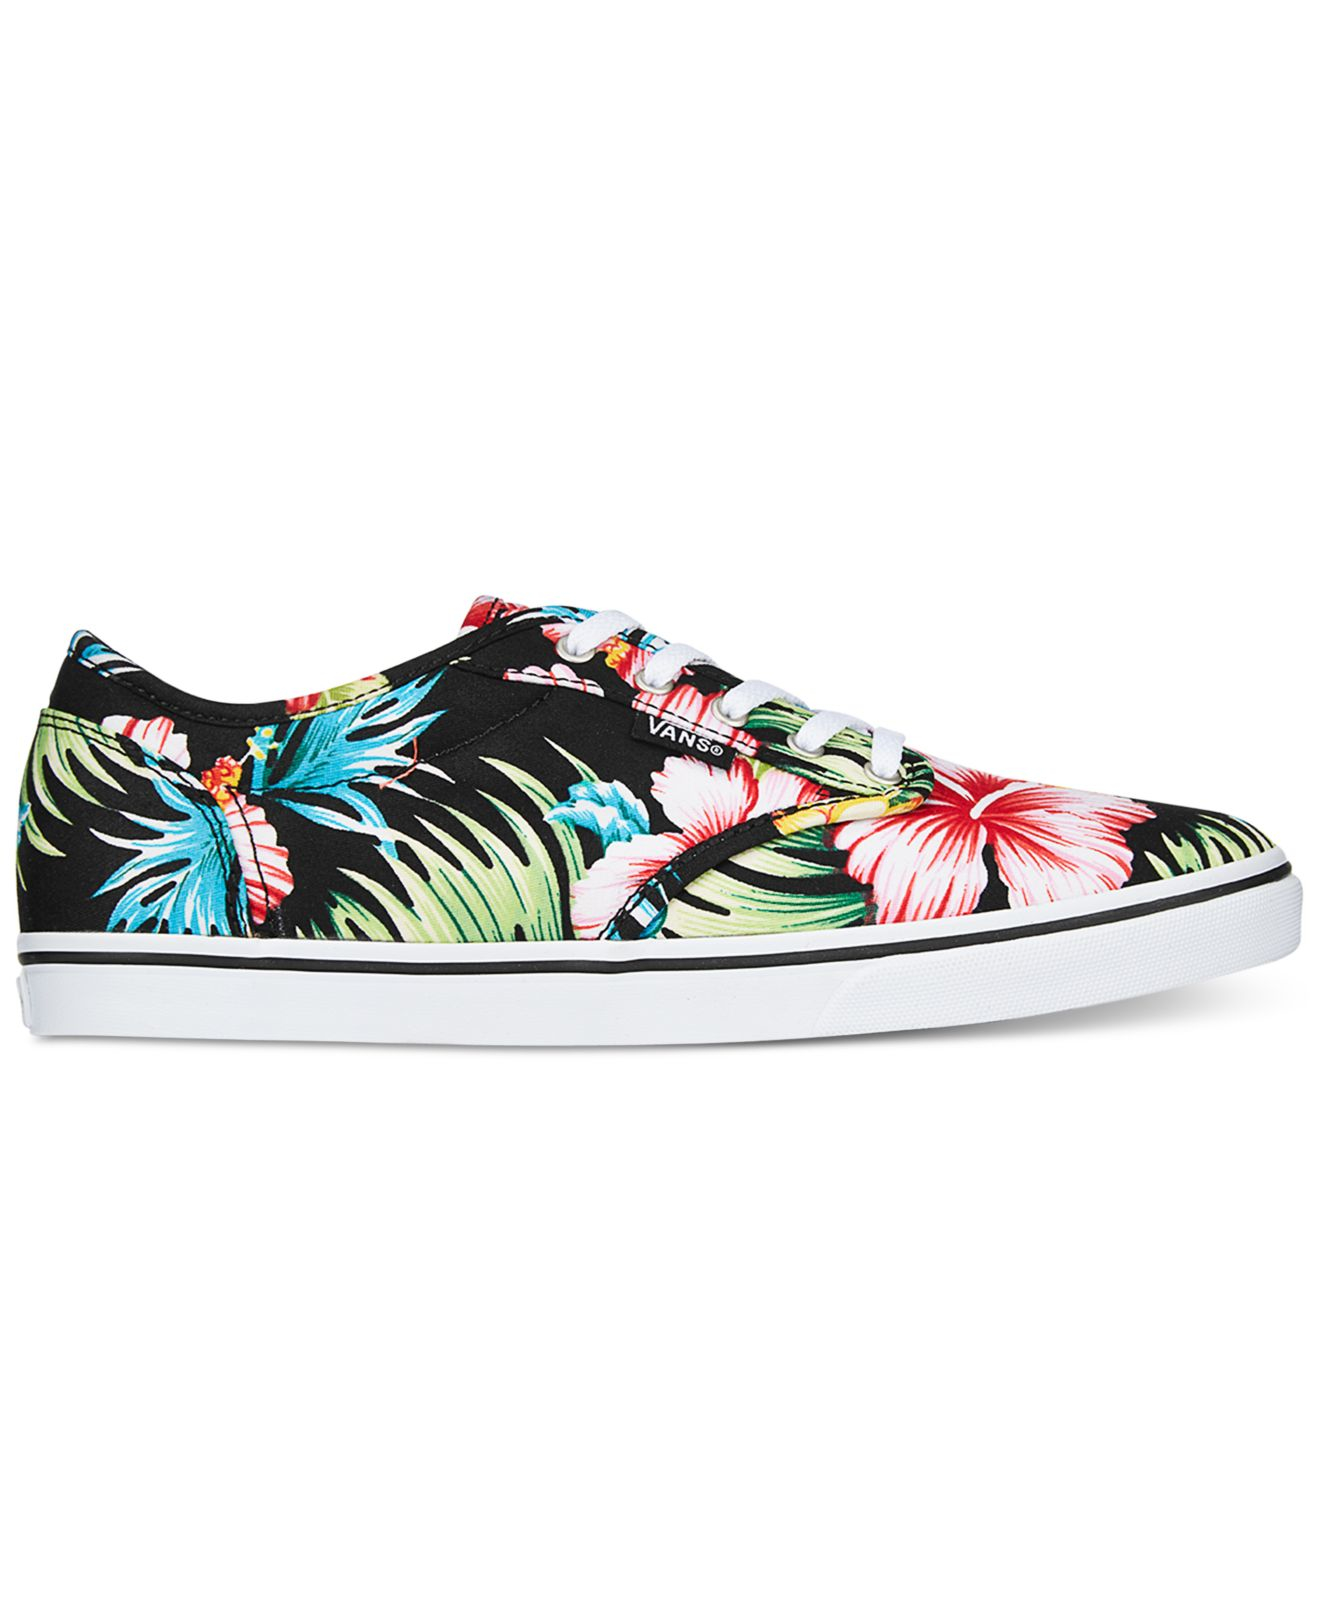 Vans Canvas Women's Atwood Low Aloha Lace-up Sneakers in Black Floral ...